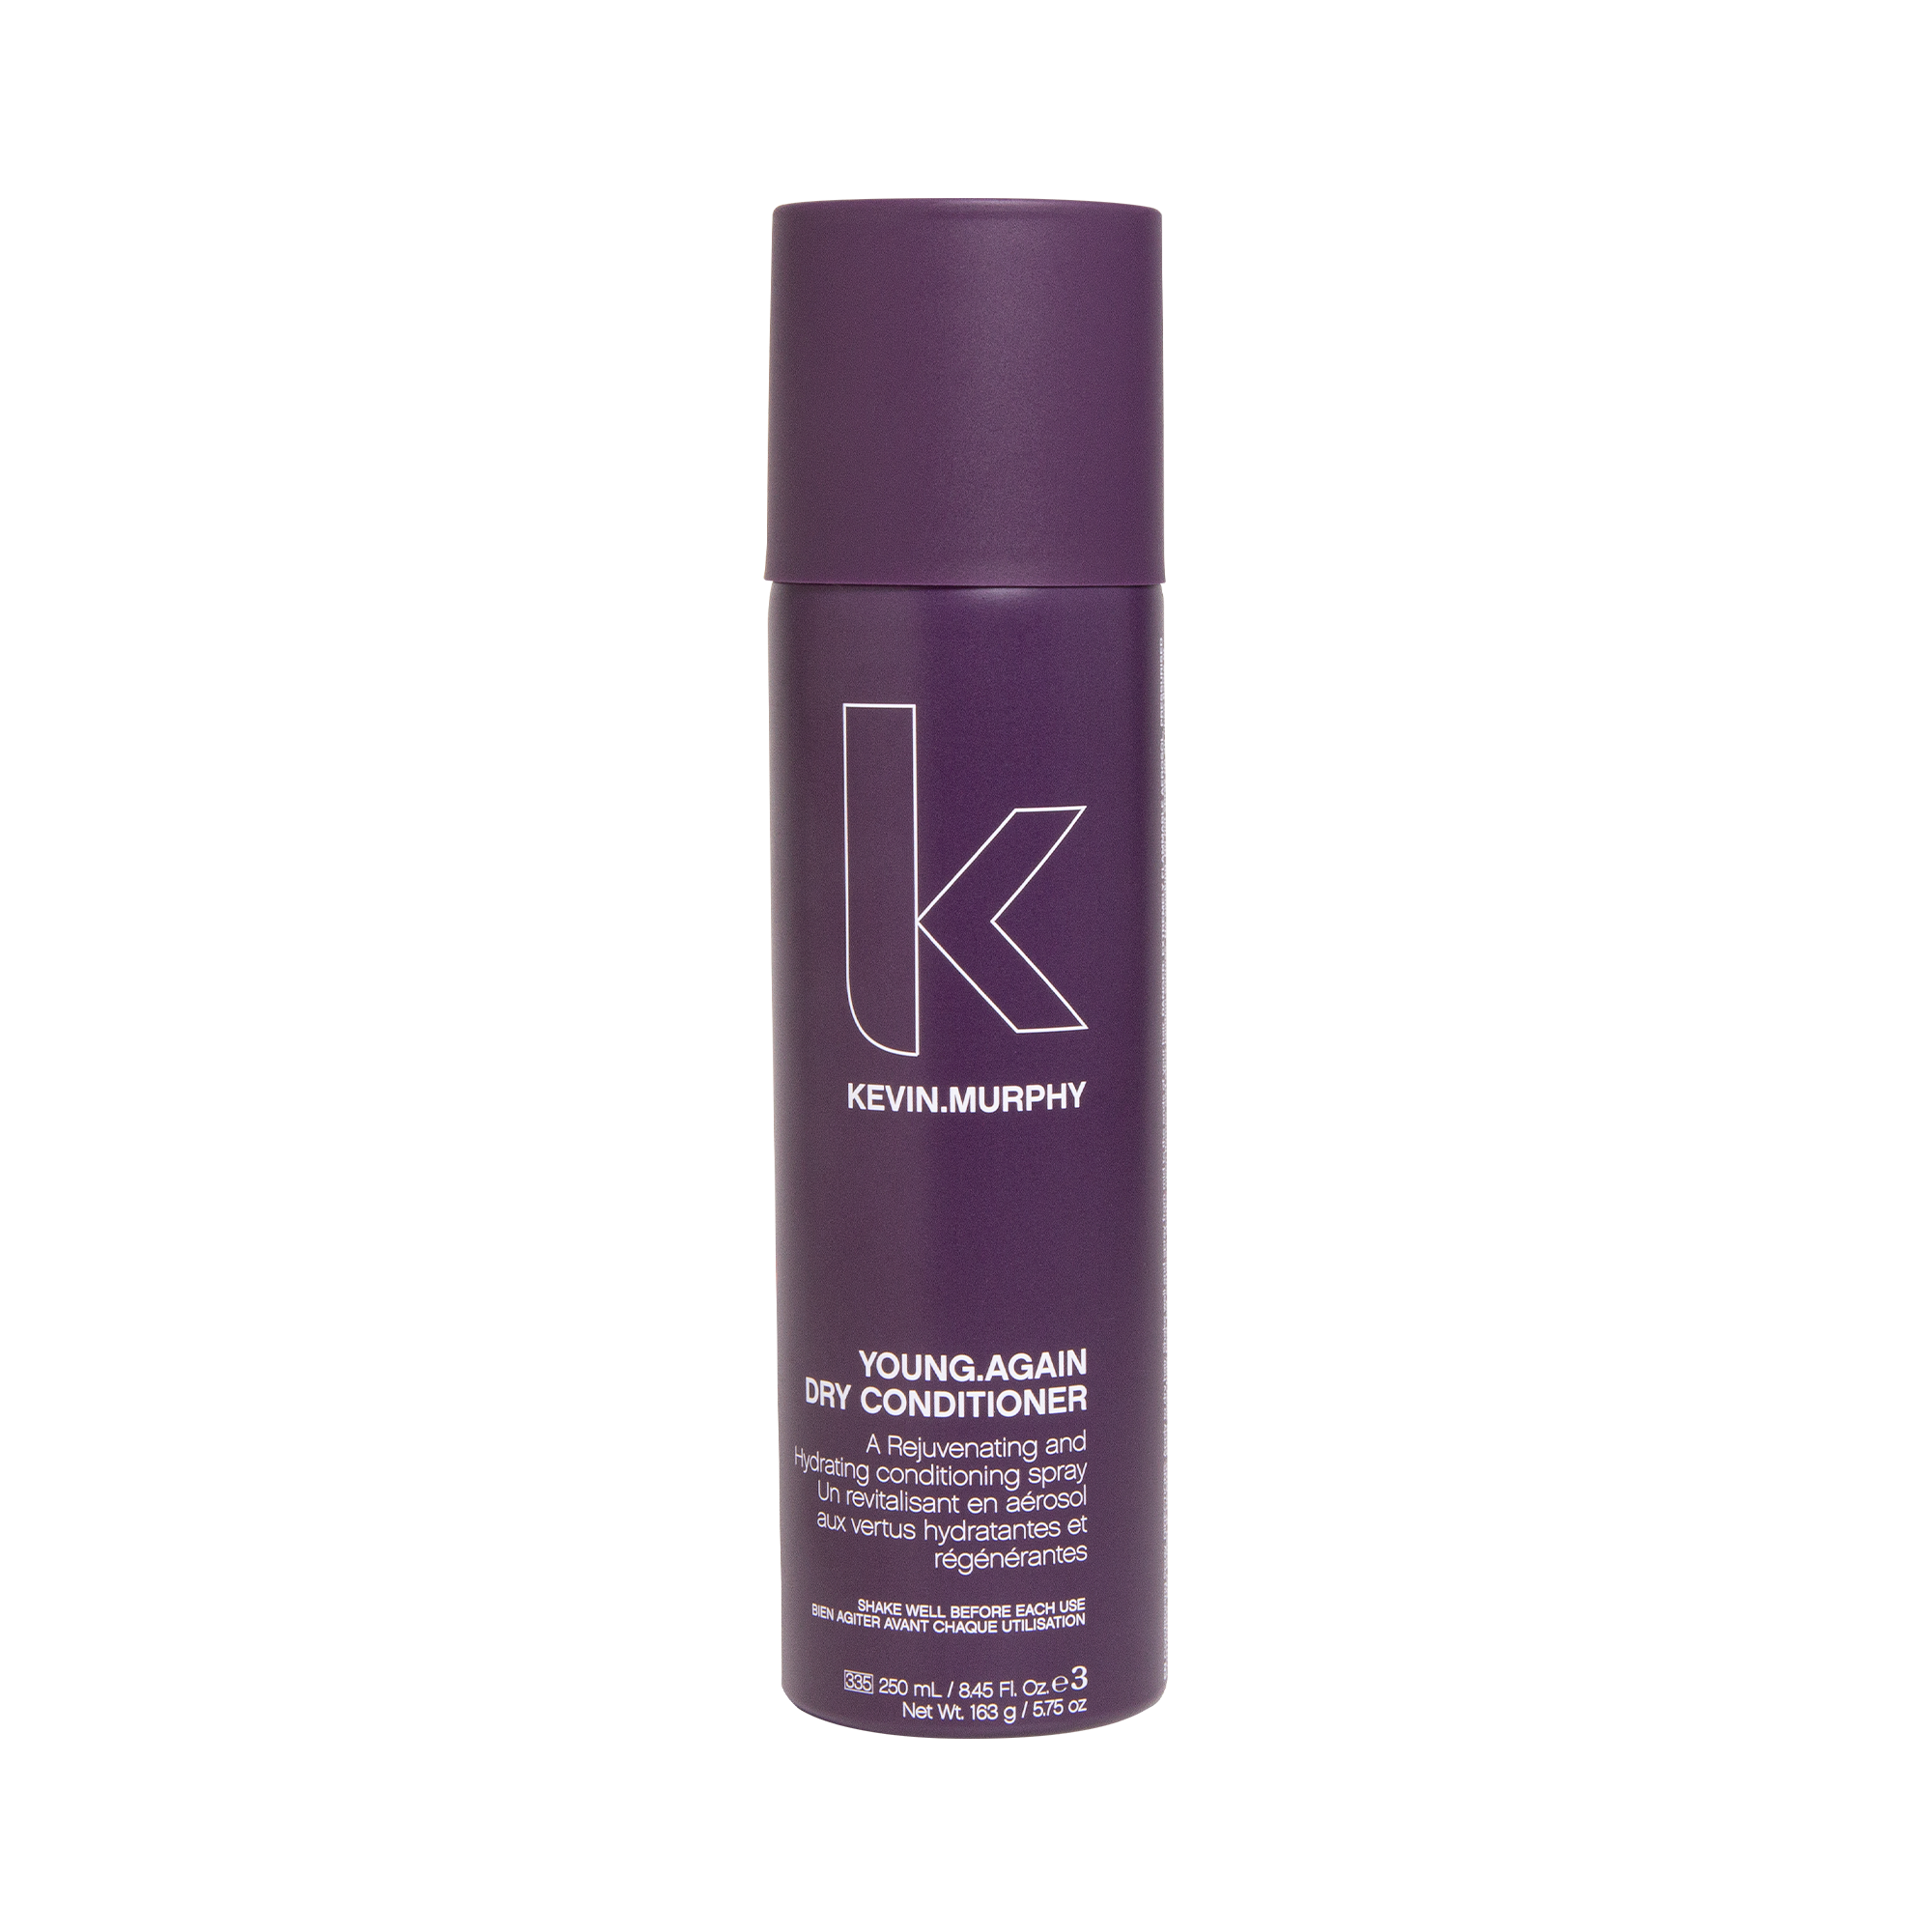 Kevin Murphy - Young.Again Dry Conditioner 250 ml.